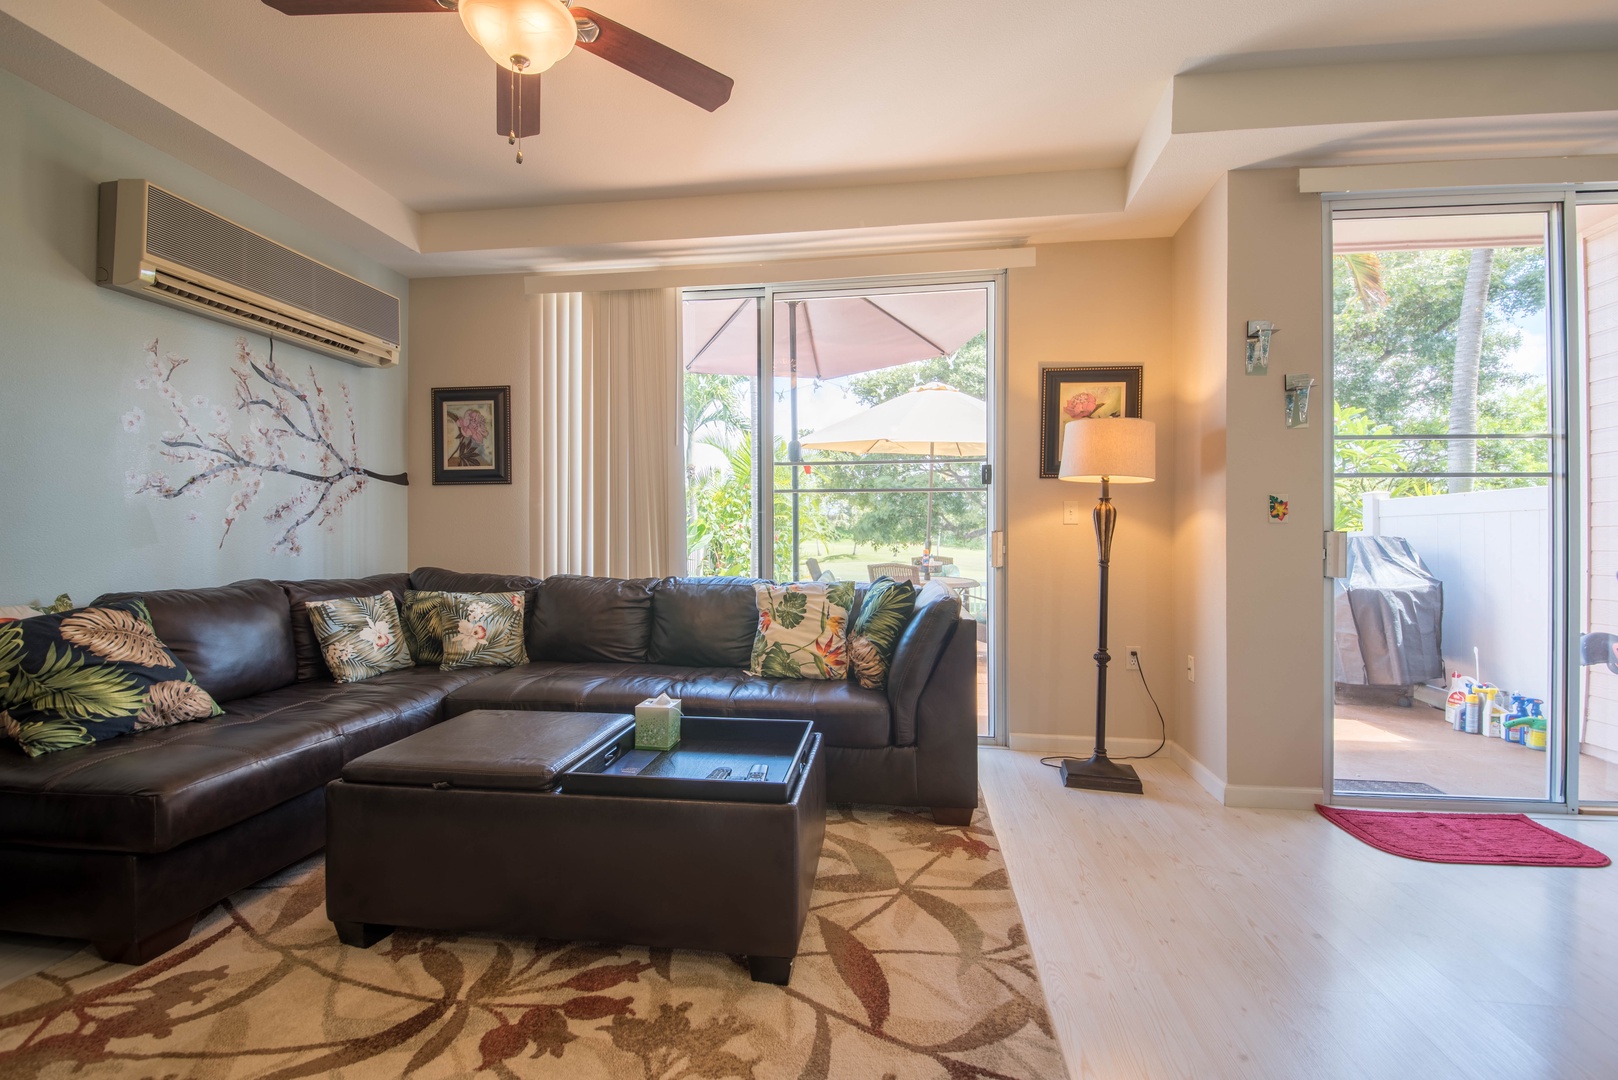 Kapolei Vacation Rentals, Fairways at Ko Olina 8G - A large leather sectional compliments the home.